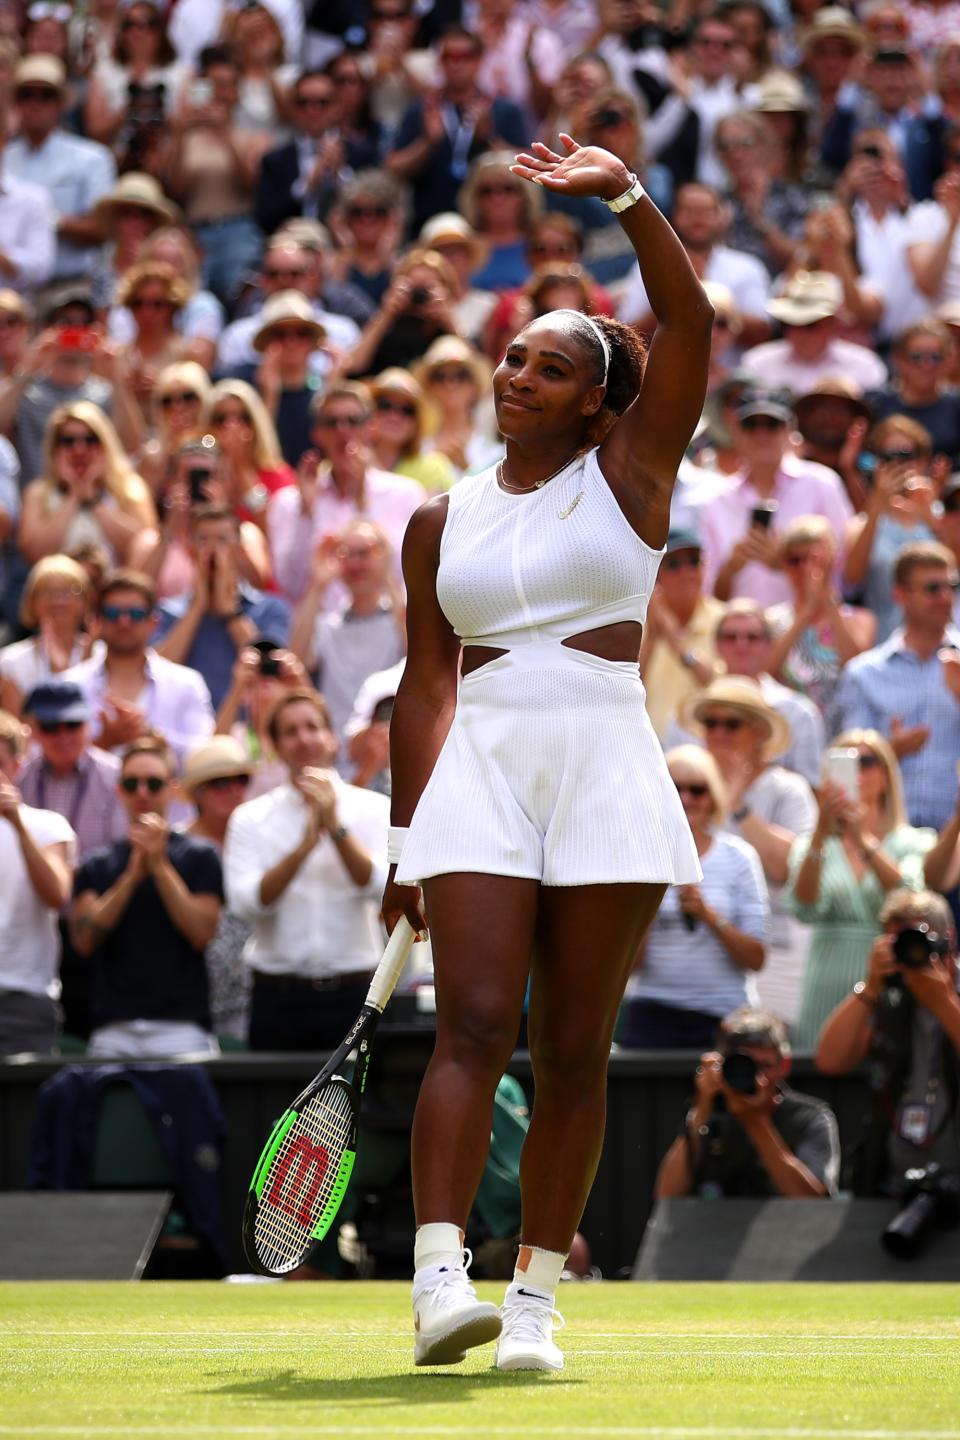 serena williams wimbledon fashion outfits and looks, LONDON, ENGLAND - JULY 11: Serena Williams of The United States celebrates victory in her Ladies' Singles semi-final match against Barbora Strycova of The Czech Republic during Day Ten of The Championships - Wimbledon 2019 at All England Lawn Tennis and Croquet Club on July 11, 2019 in London, England. (Photo by Clive Brunskill/Getty Images)